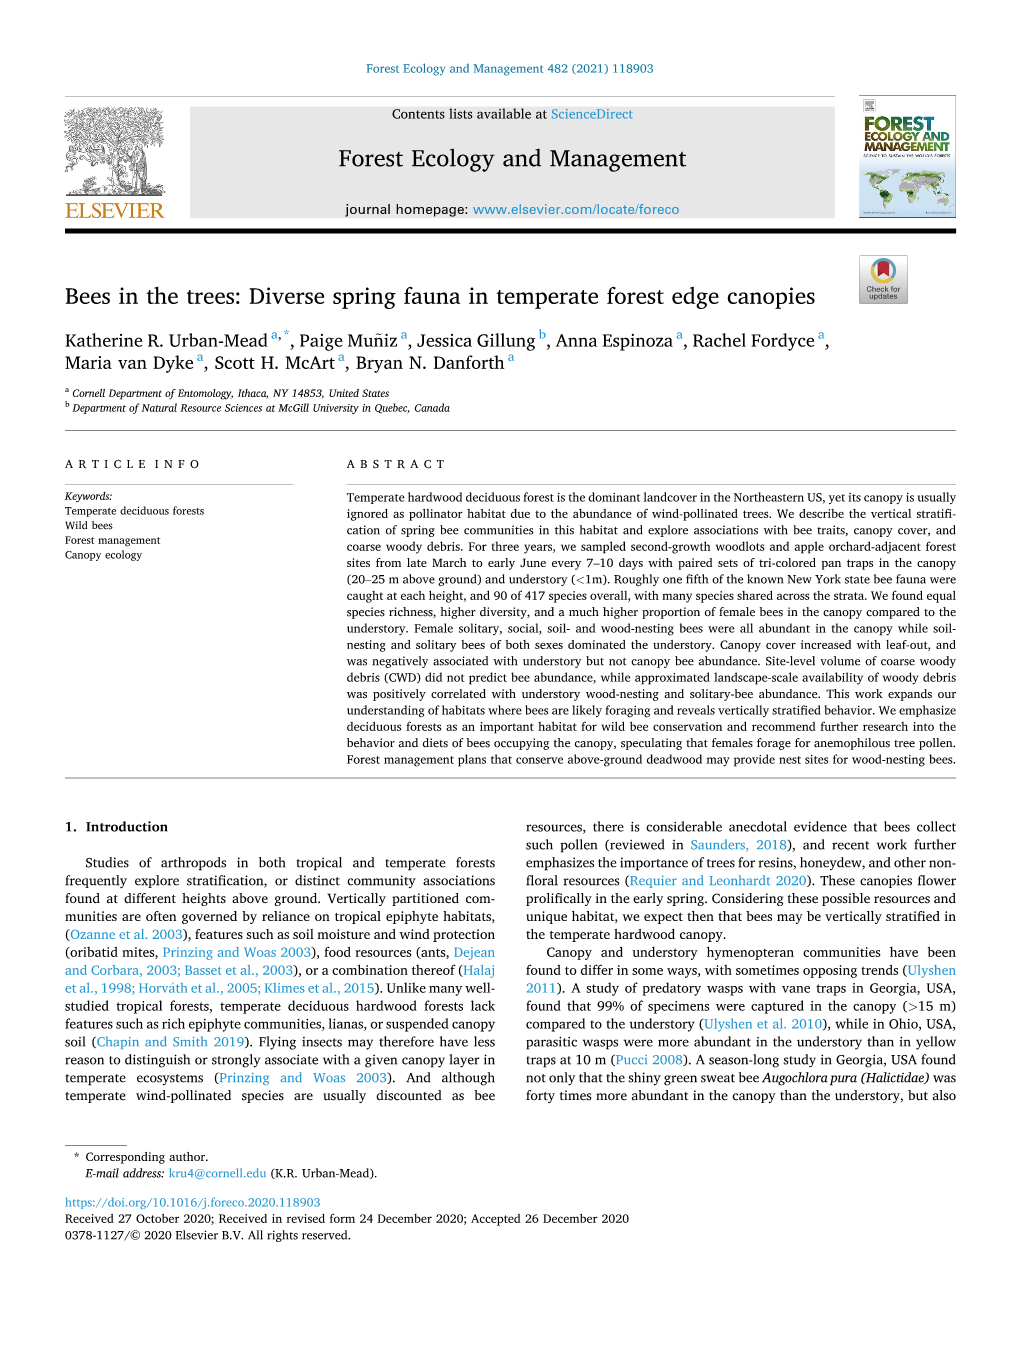 Bees in the Trees: Diverse Spring Fauna in Temperate Forest Edge Canopies